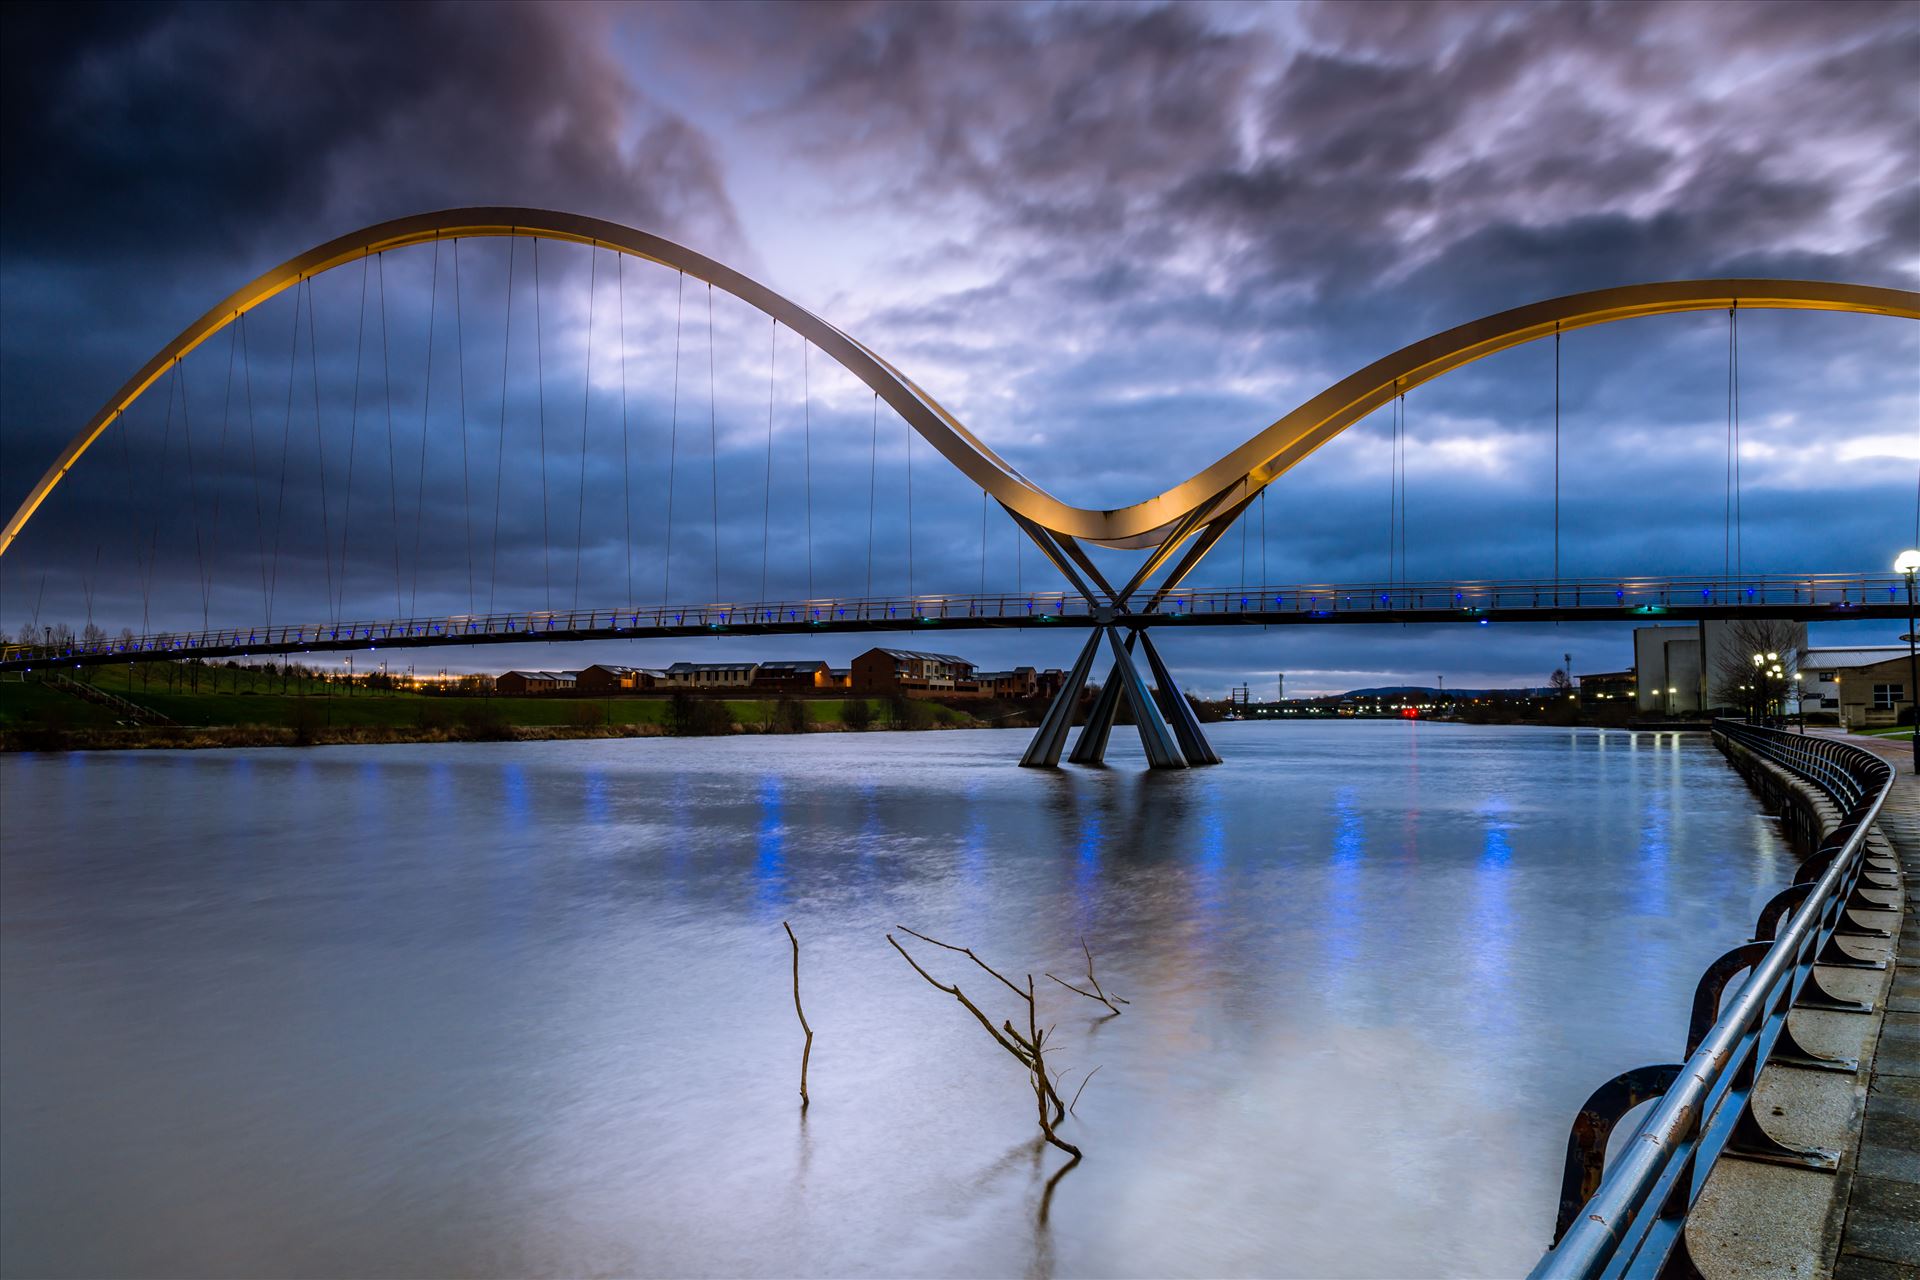 The Infinity Bridge 14 - The Infinity Bridge is a public pedestrian and cycle footbridge across the River Tees that was officially opened on 14 May 2009 at a cost of £15 million. by philreay